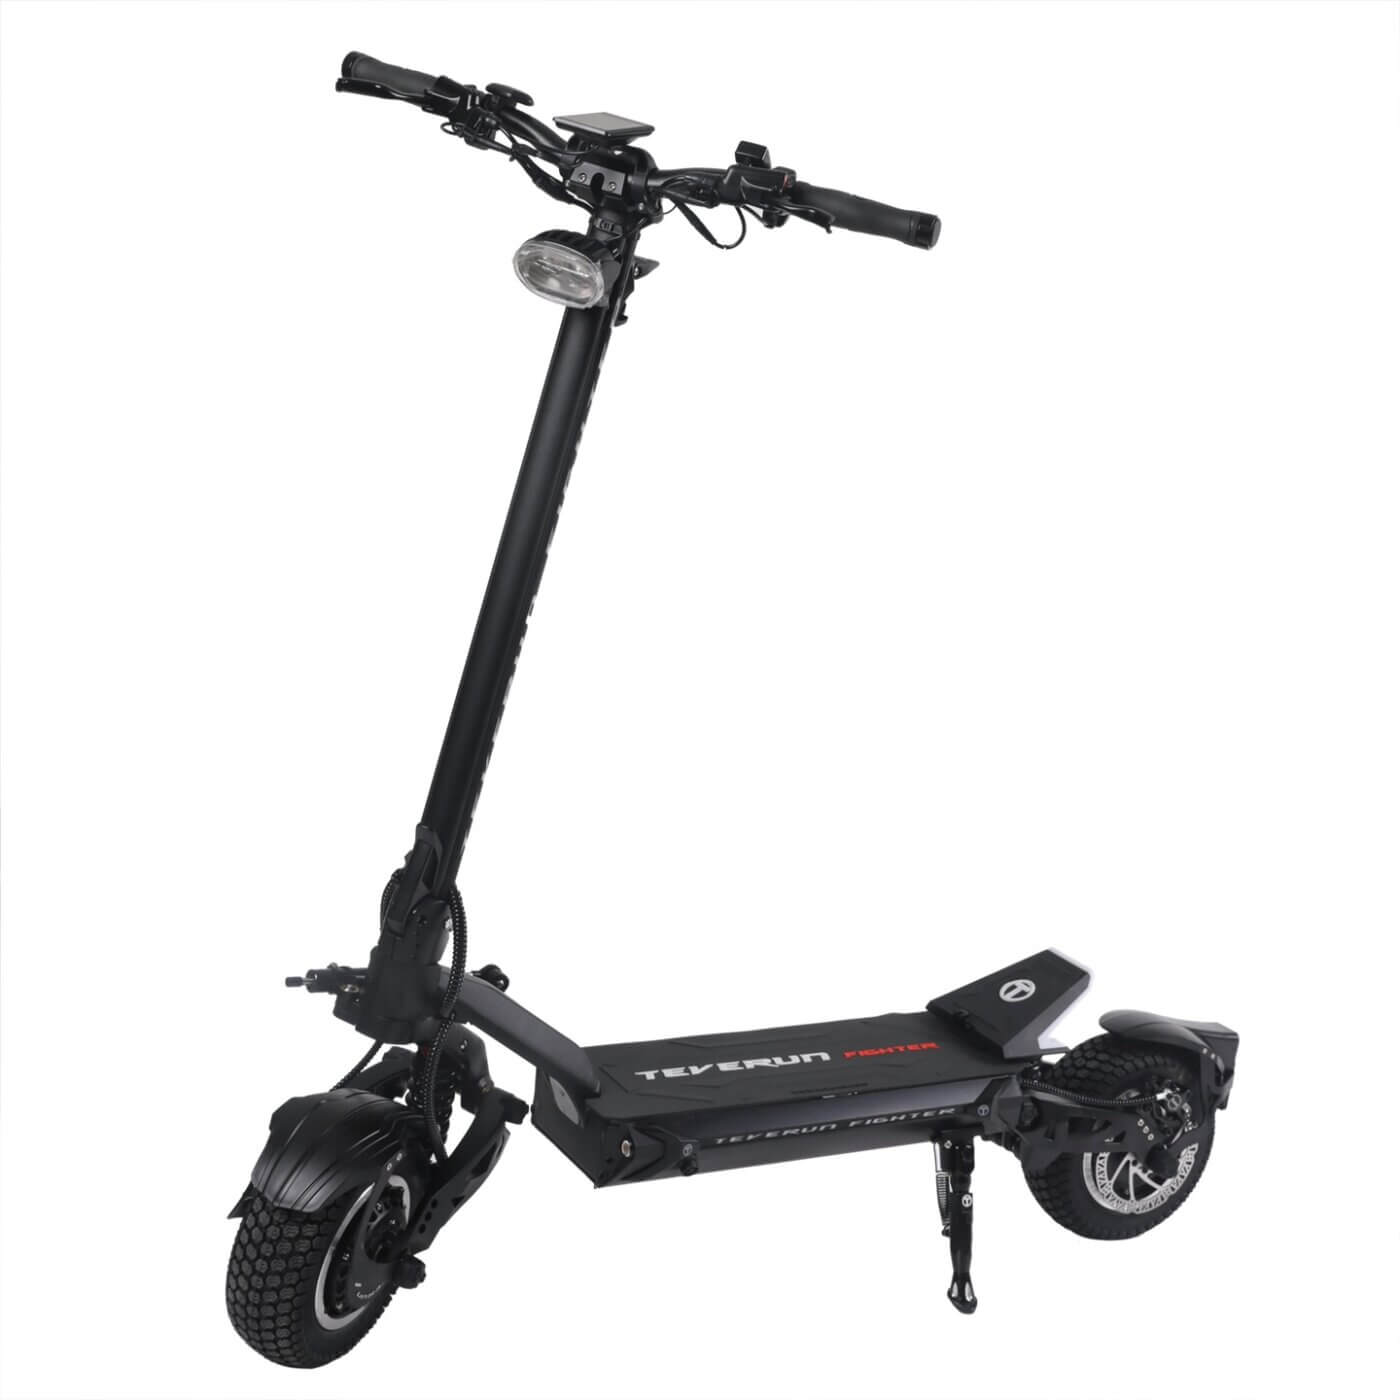 A black electric scooter on a white background, dubbed the Fighter 10.